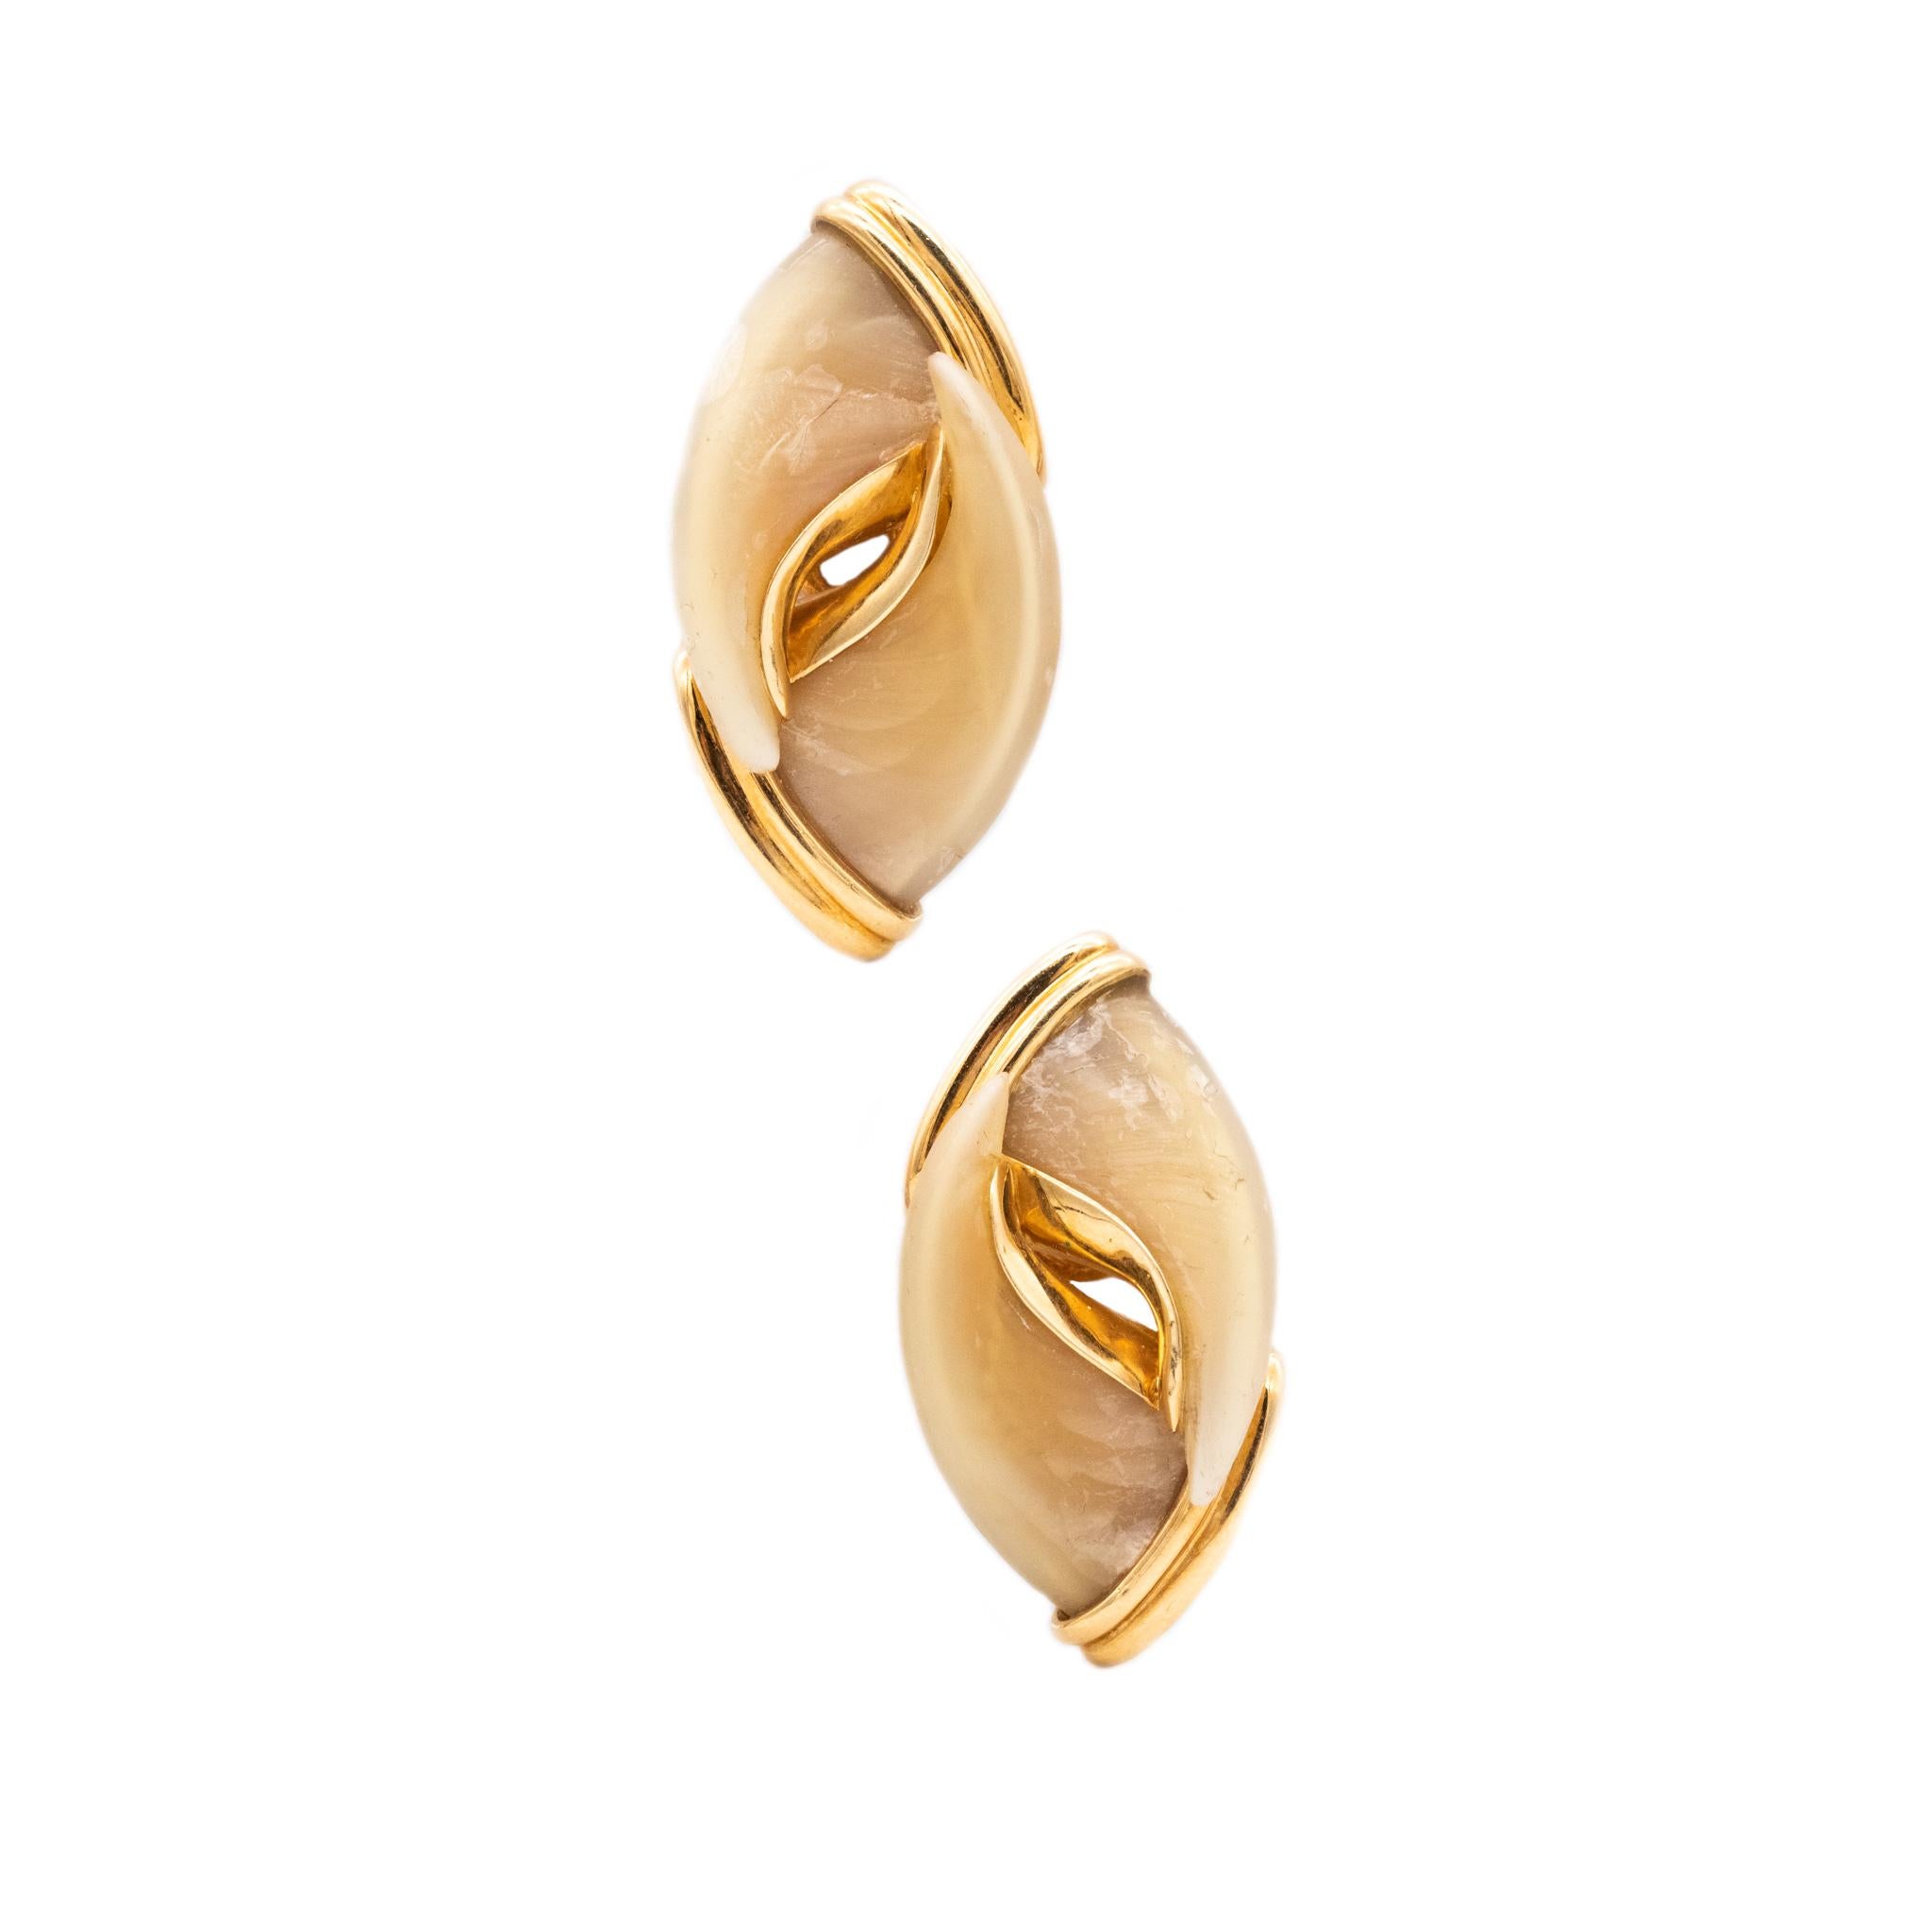 Modernist Bry & Co Paris 1970 Rare French Earrings In 18Kt Yellow Gold With Four Claws For Sale